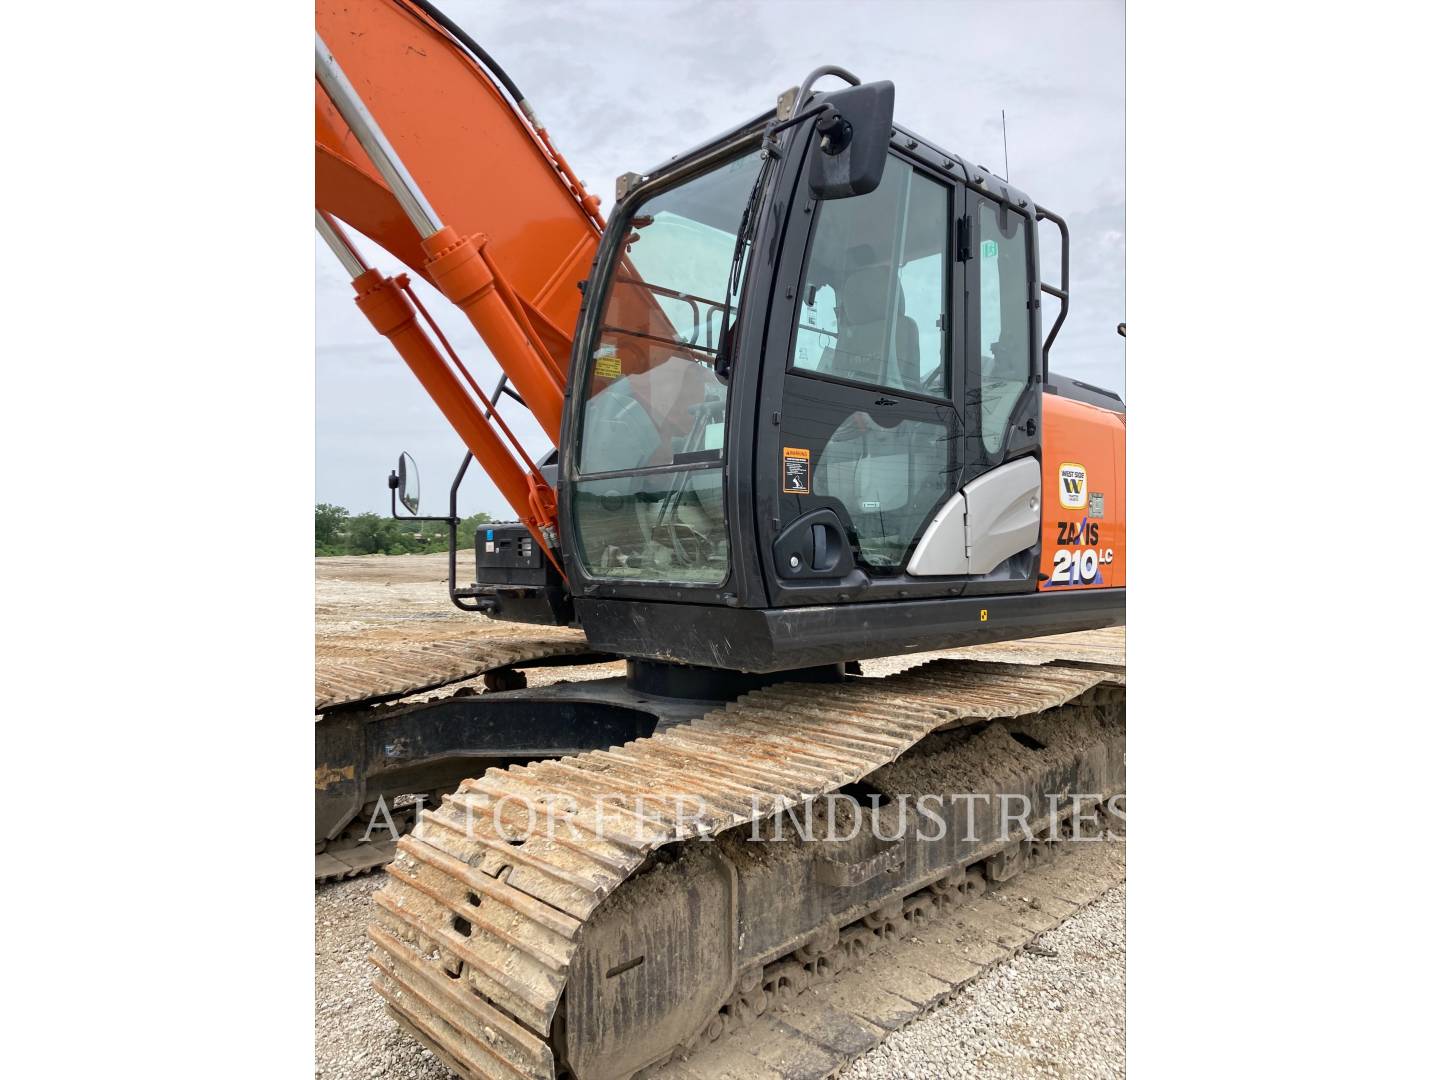 2018 HLL ZX210LC-6N – #4893704